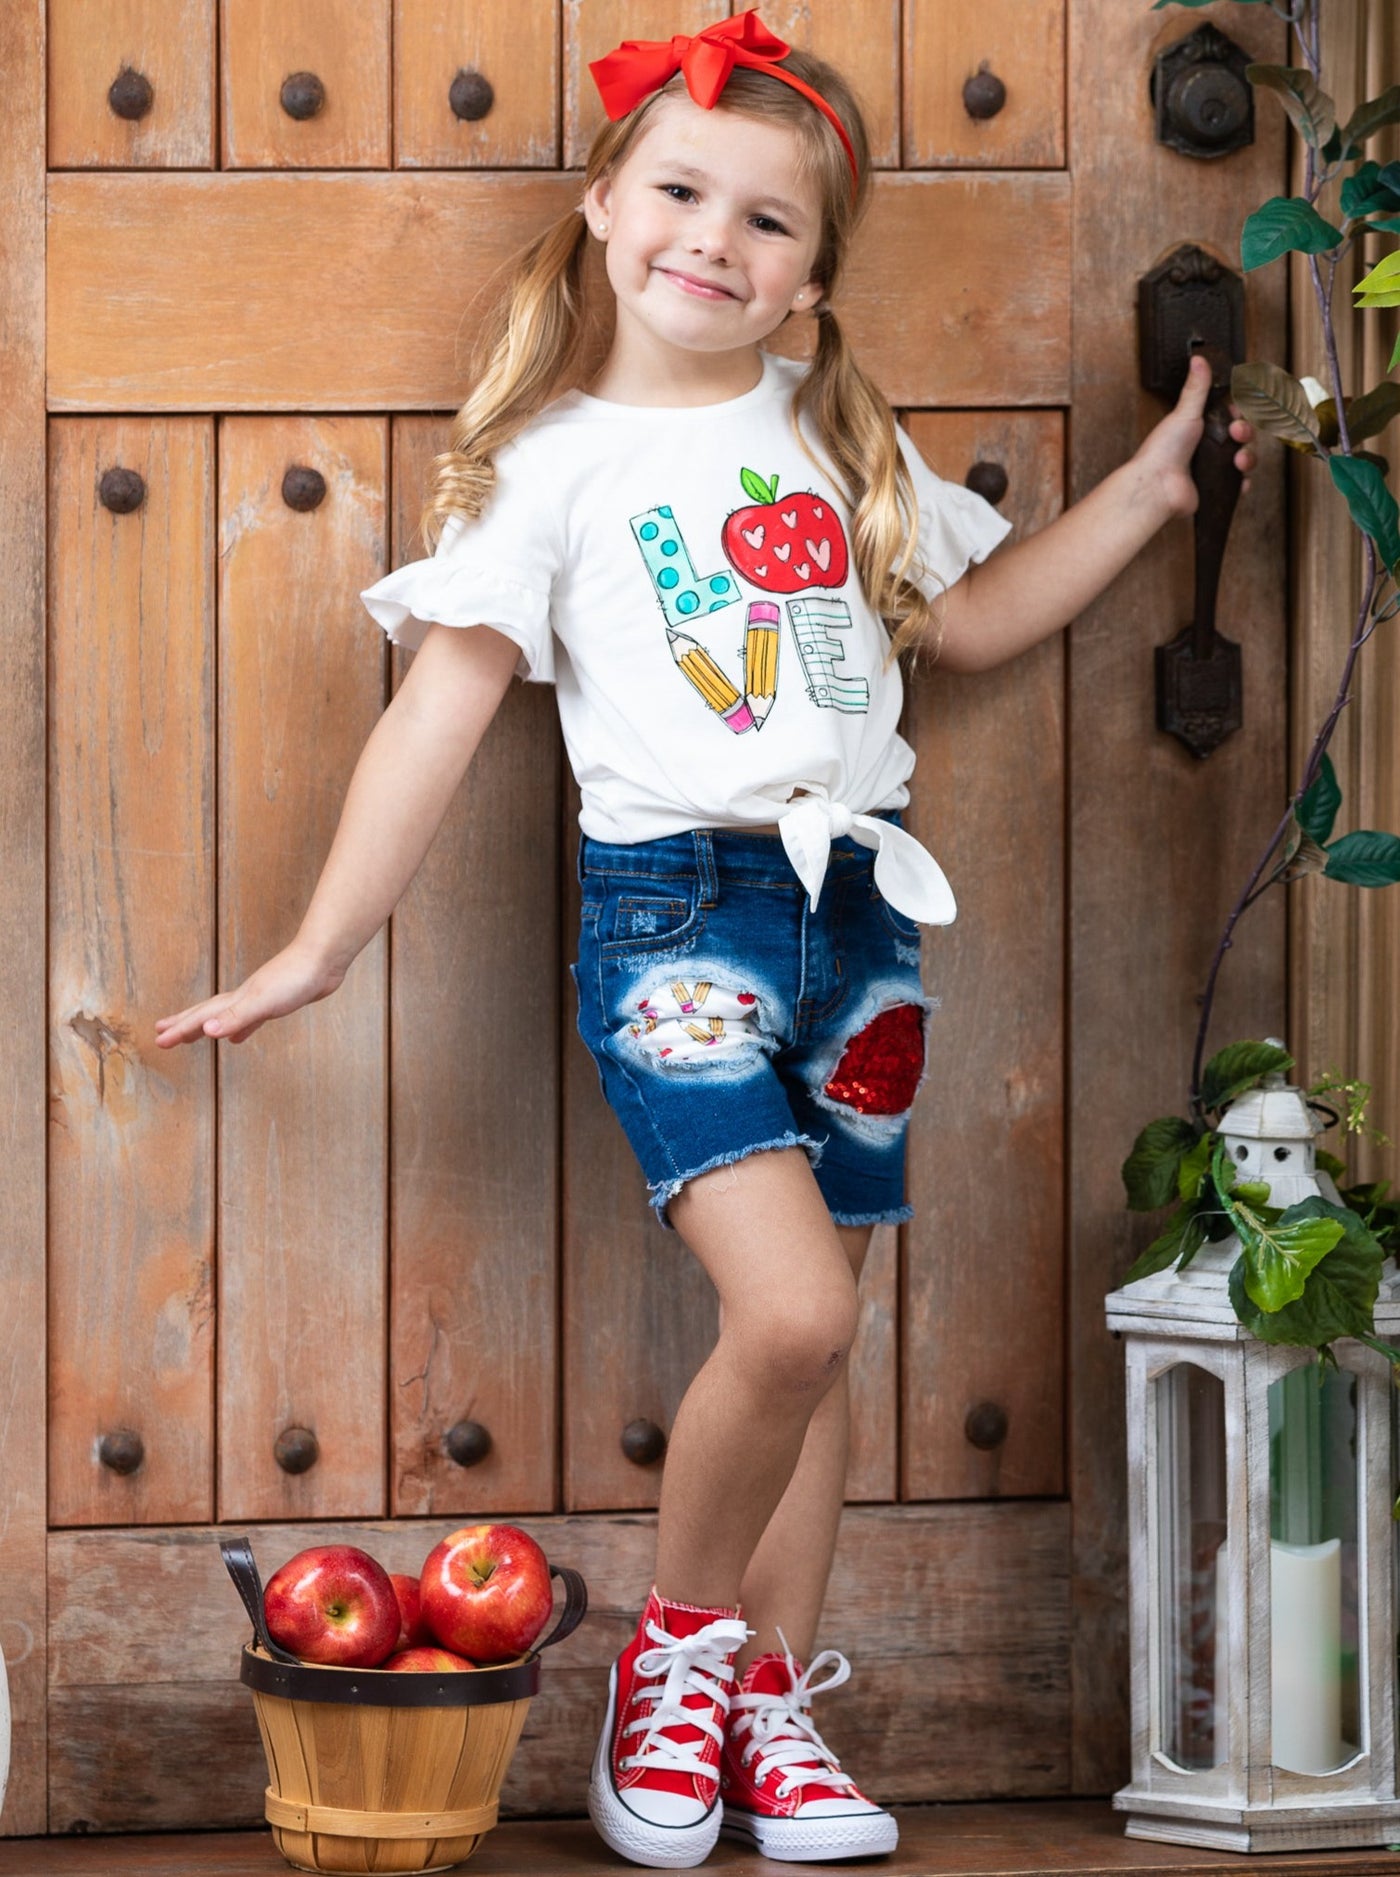 1st Day of School | Knot Top & Patched Denim Short Set | Mia Belle Girls